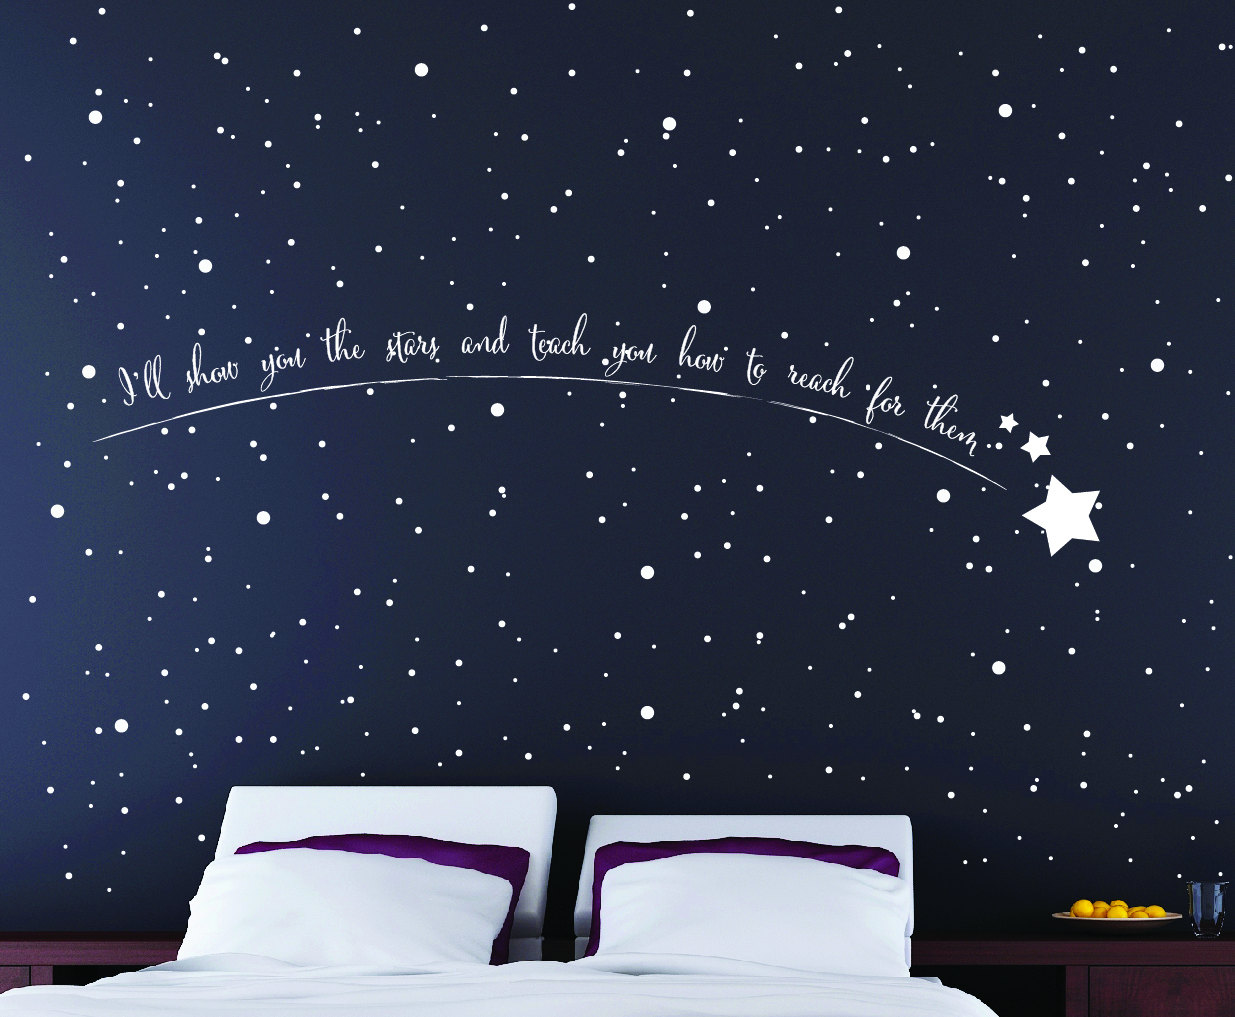 Home / Wall Stickers - Night Sky Wall Stickers , HD Wallpaper & Backgrounds